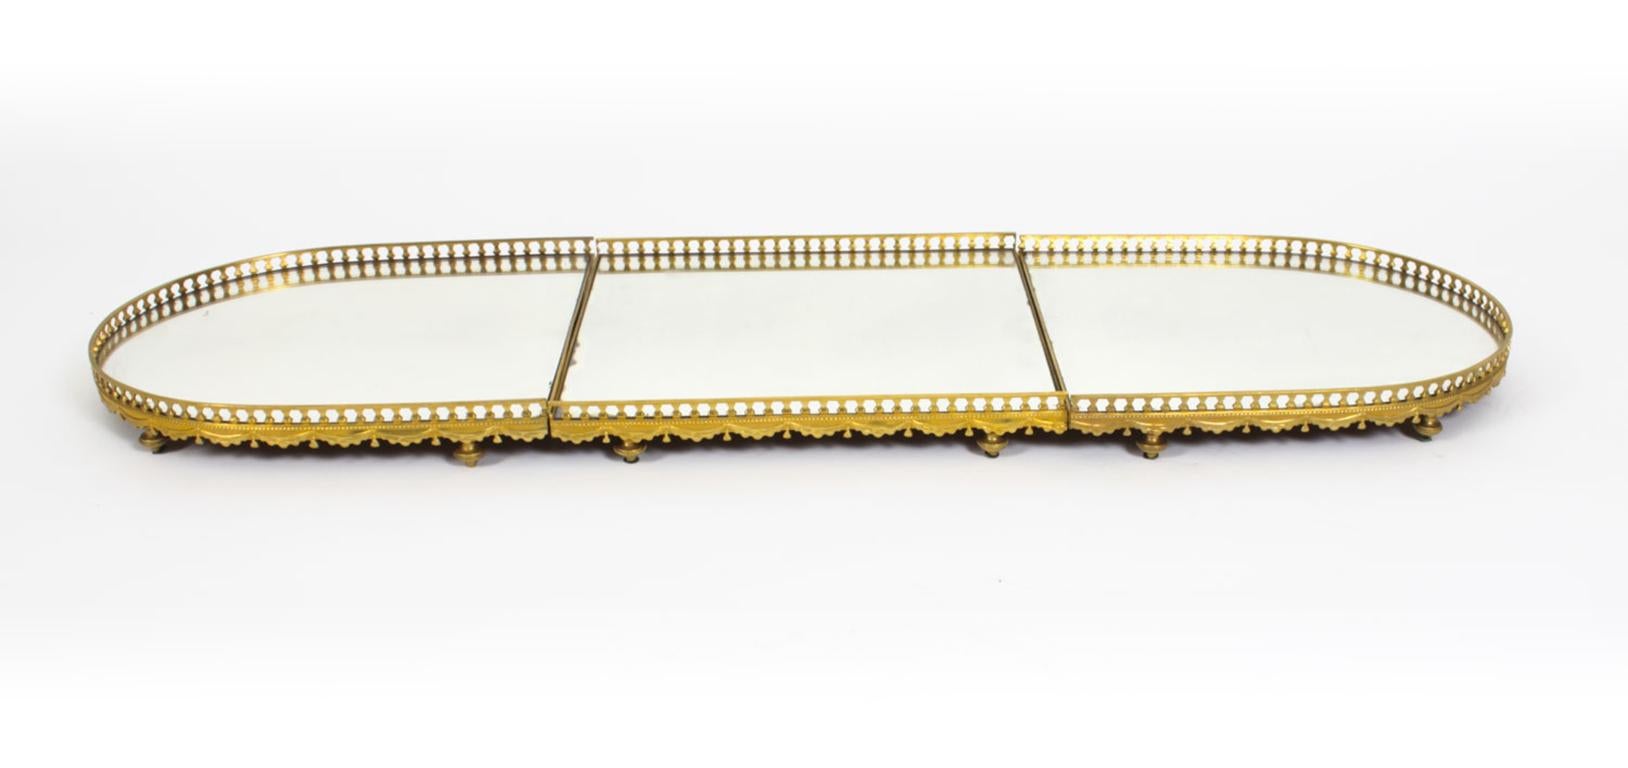 This is a superb antique French ormolu surtout-de-table or mirrored plateau in the classic Louis XVI style, circa 1870 in date.
 
The elongated oval form features three mirrored sections with their original inset mirrored glass. The mirror is